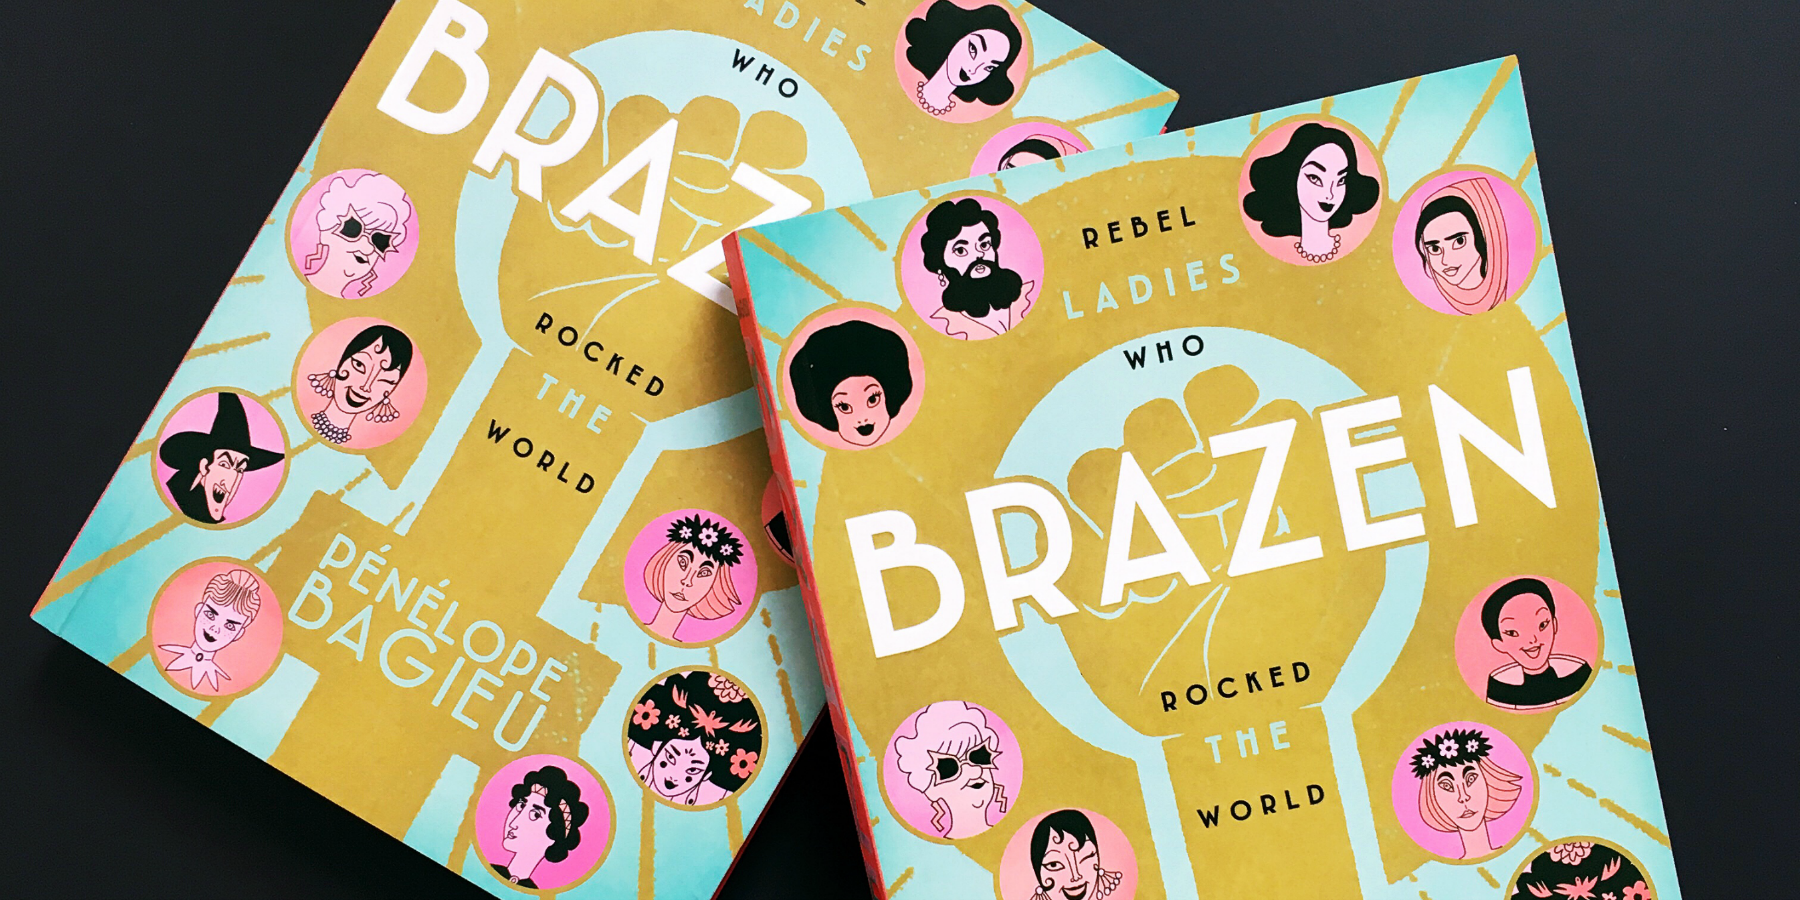 BRAZEN: A Totally Amazing Graphic Novel For Women, By Women